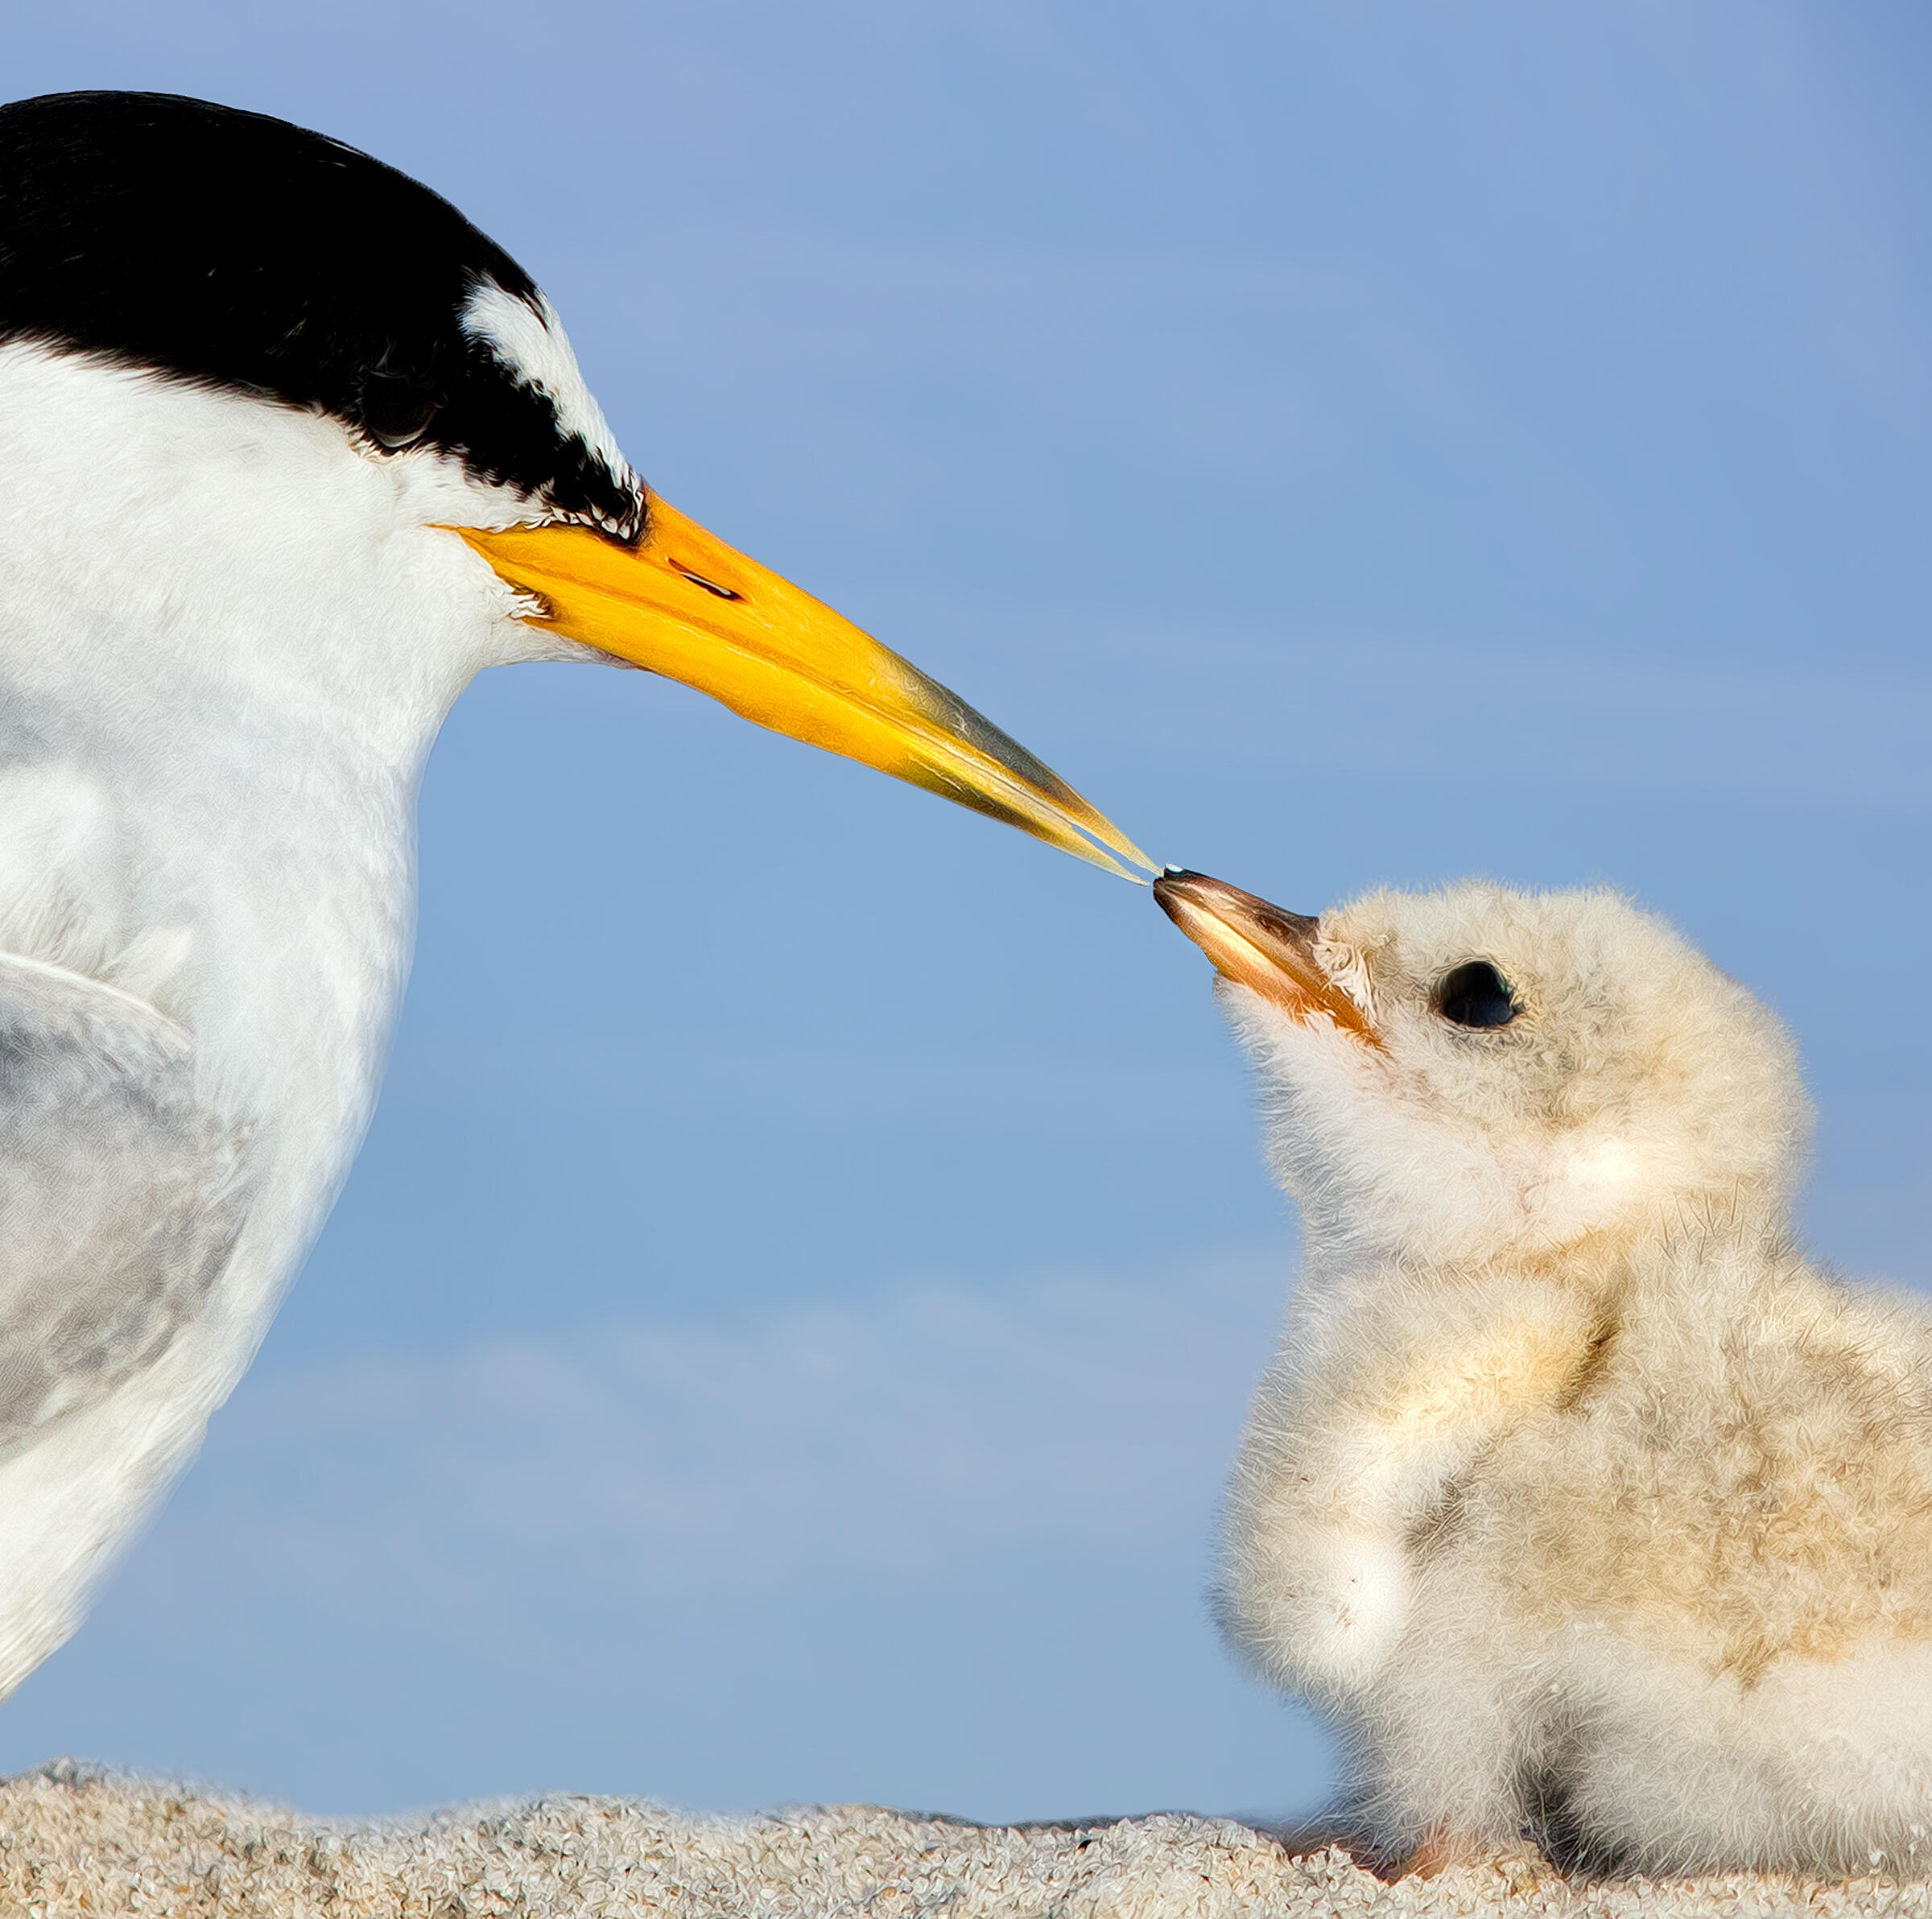 Close up on the face of an adult Least Tern touching beaks with its chick. The adult has a black cap with a small white strip on its forehead.